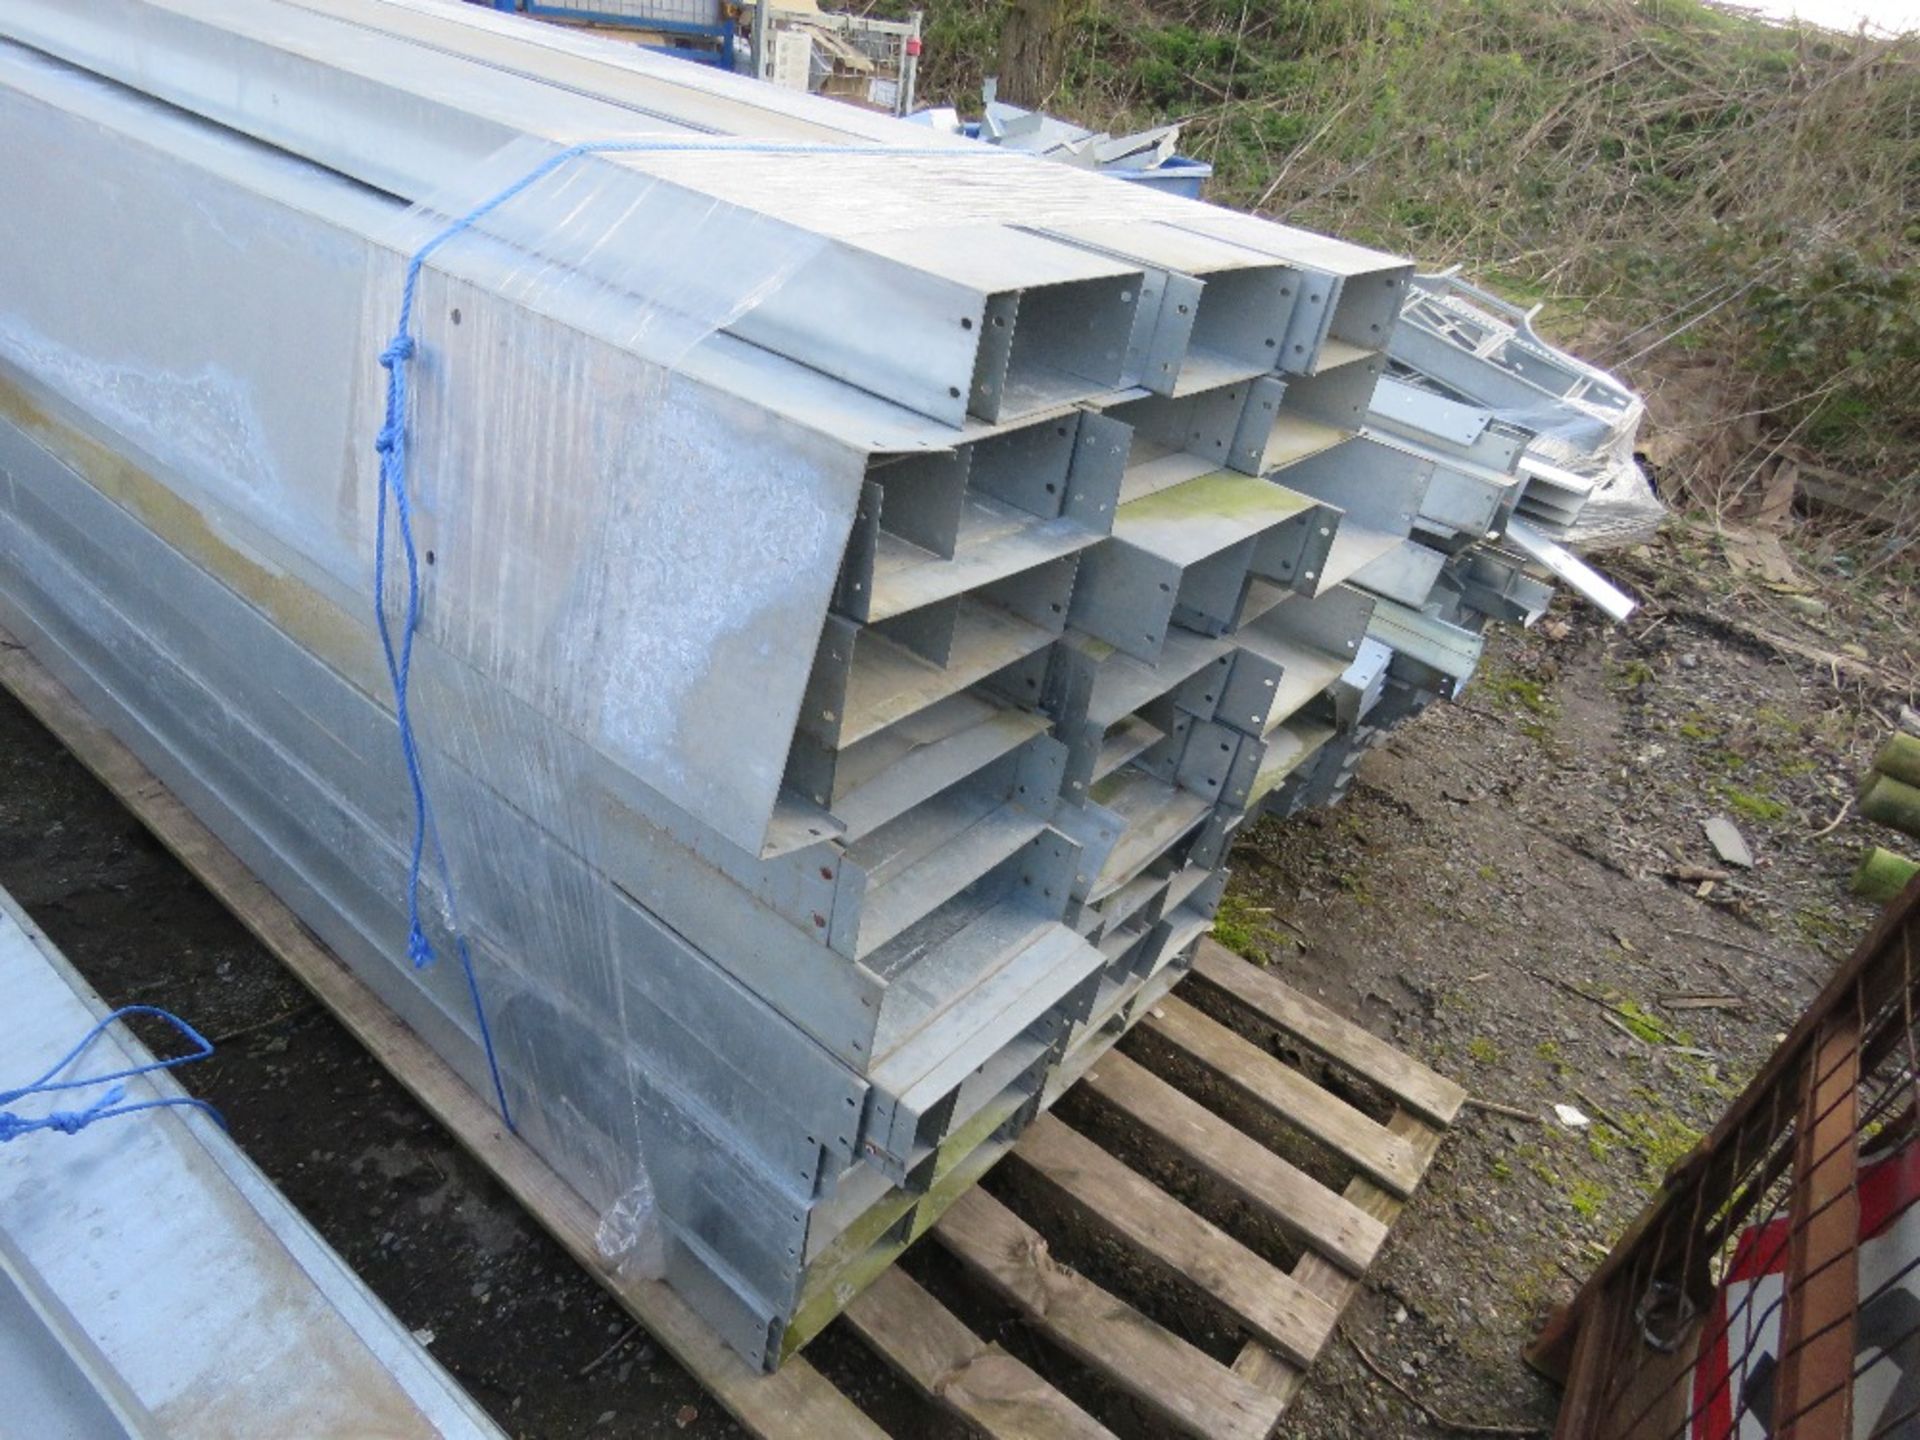 LARGE QUANTITY OF METAL DUCTING PARTS INCLUDING DUCTS AT 9FT LENGTH APPROX. SOURCED FROM COMPANY LIQ - Image 3 of 9